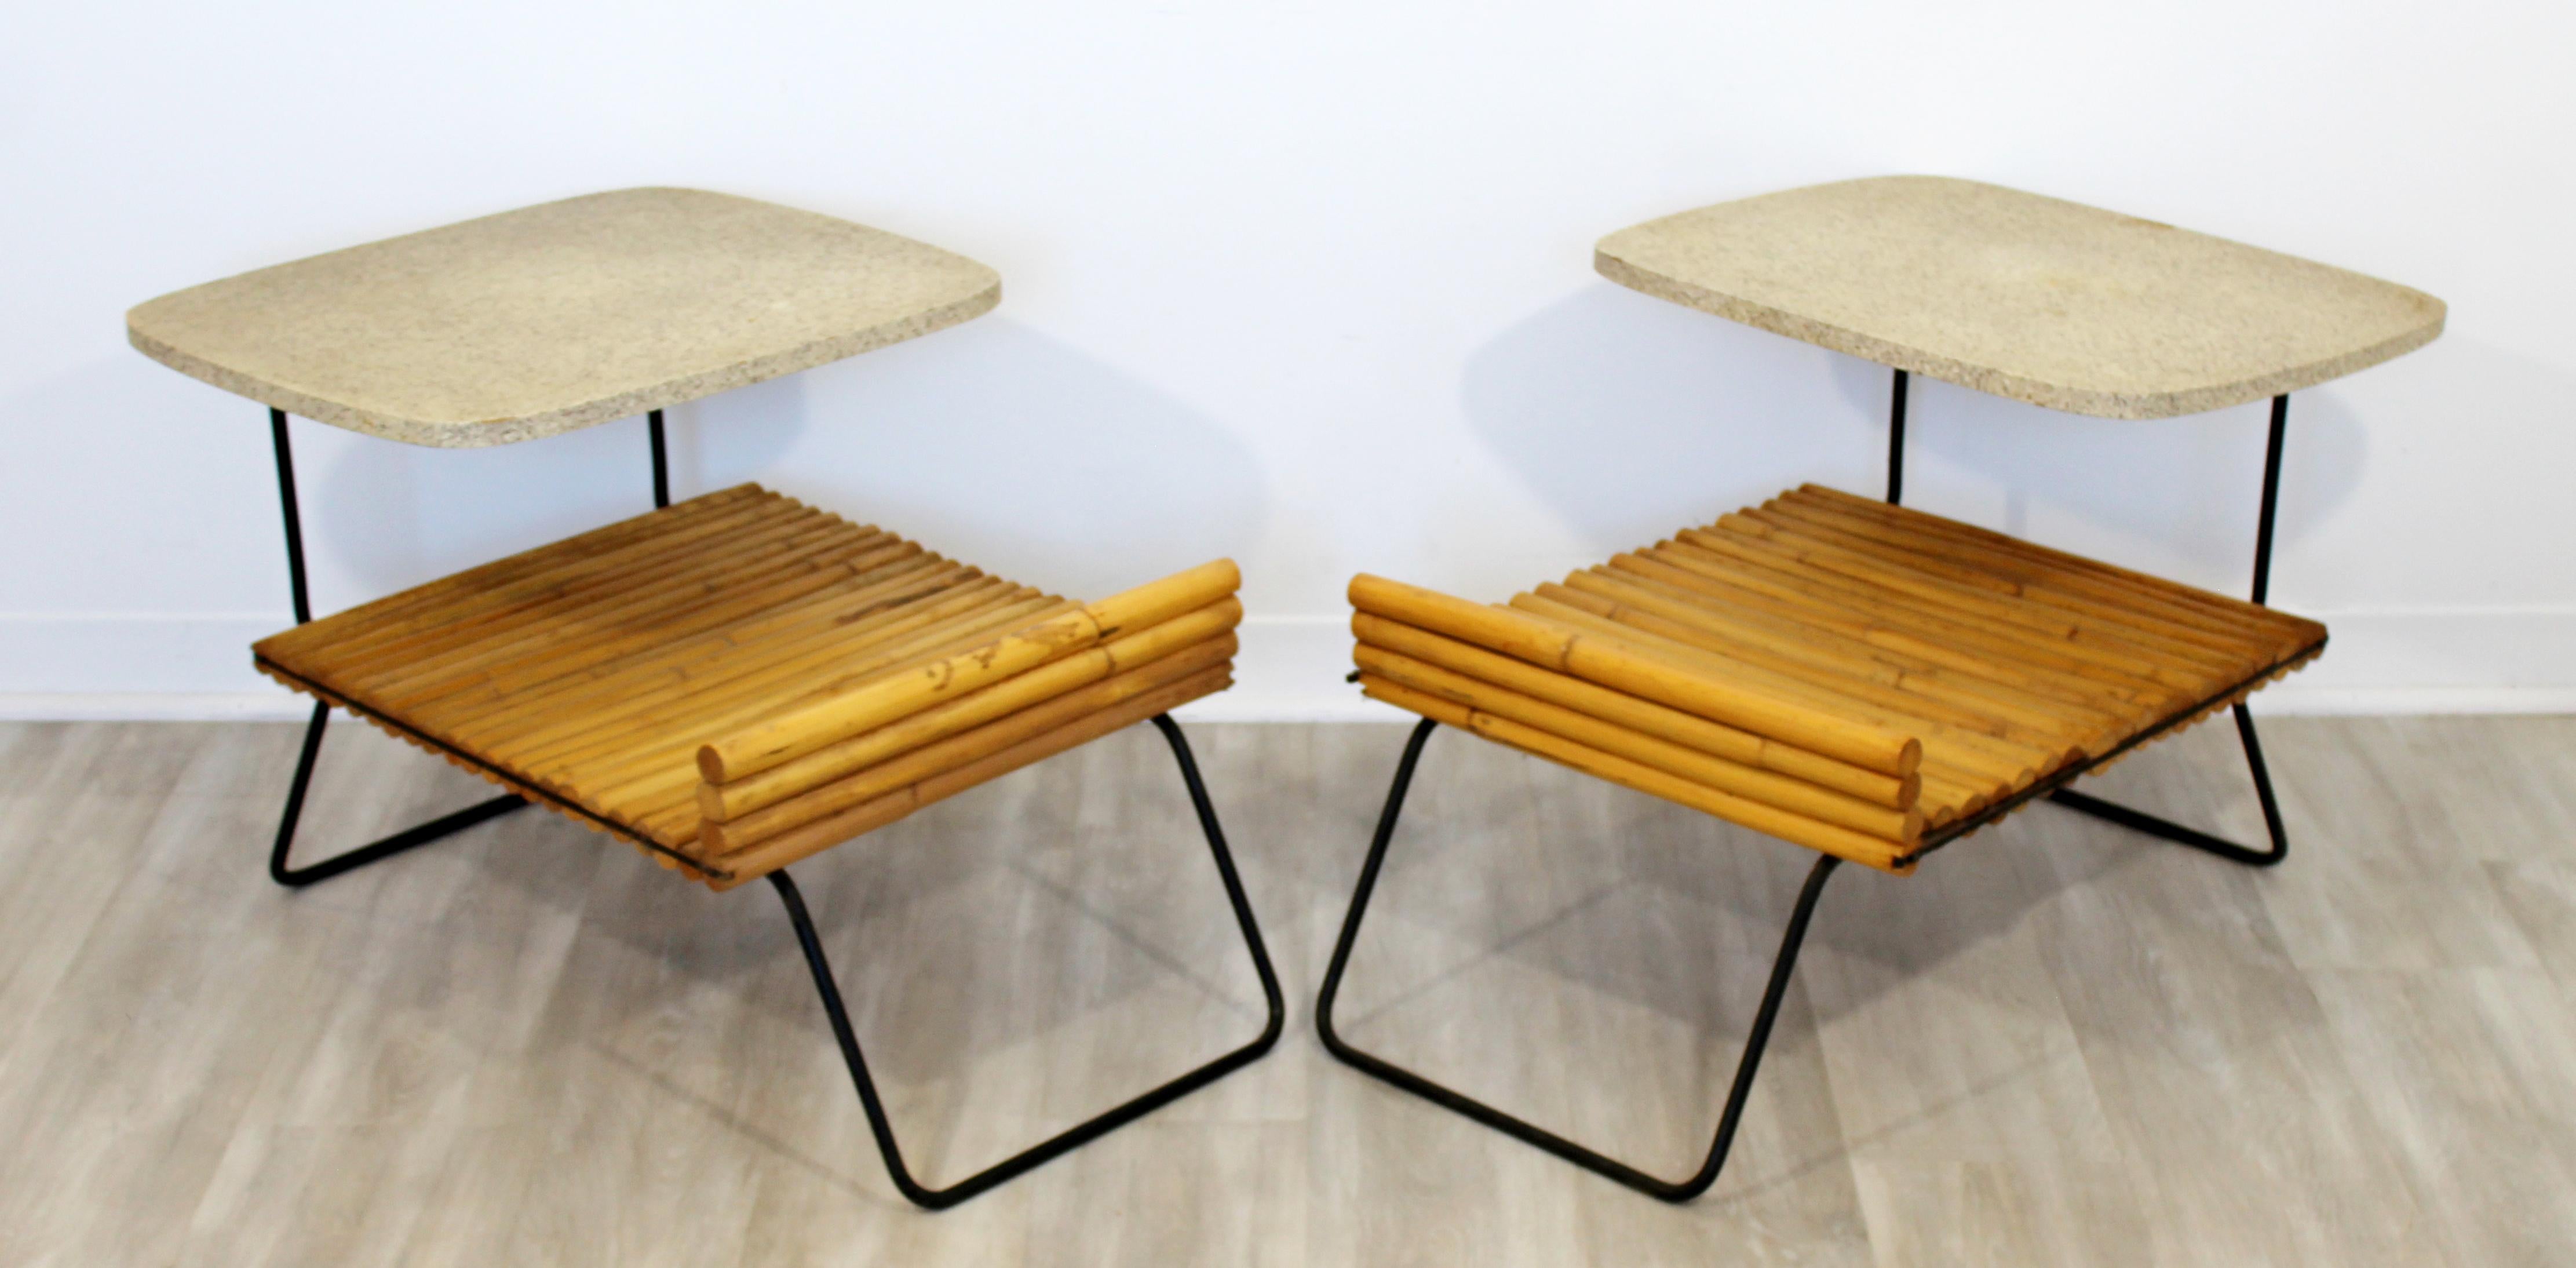 For your consideration is a fabulous pair of bamboo and wrought iron, two tiered side or end tables, by Herbert and Shirley Ritts, circa the 1950s. In good vintage condition. The dimensions are 19.5